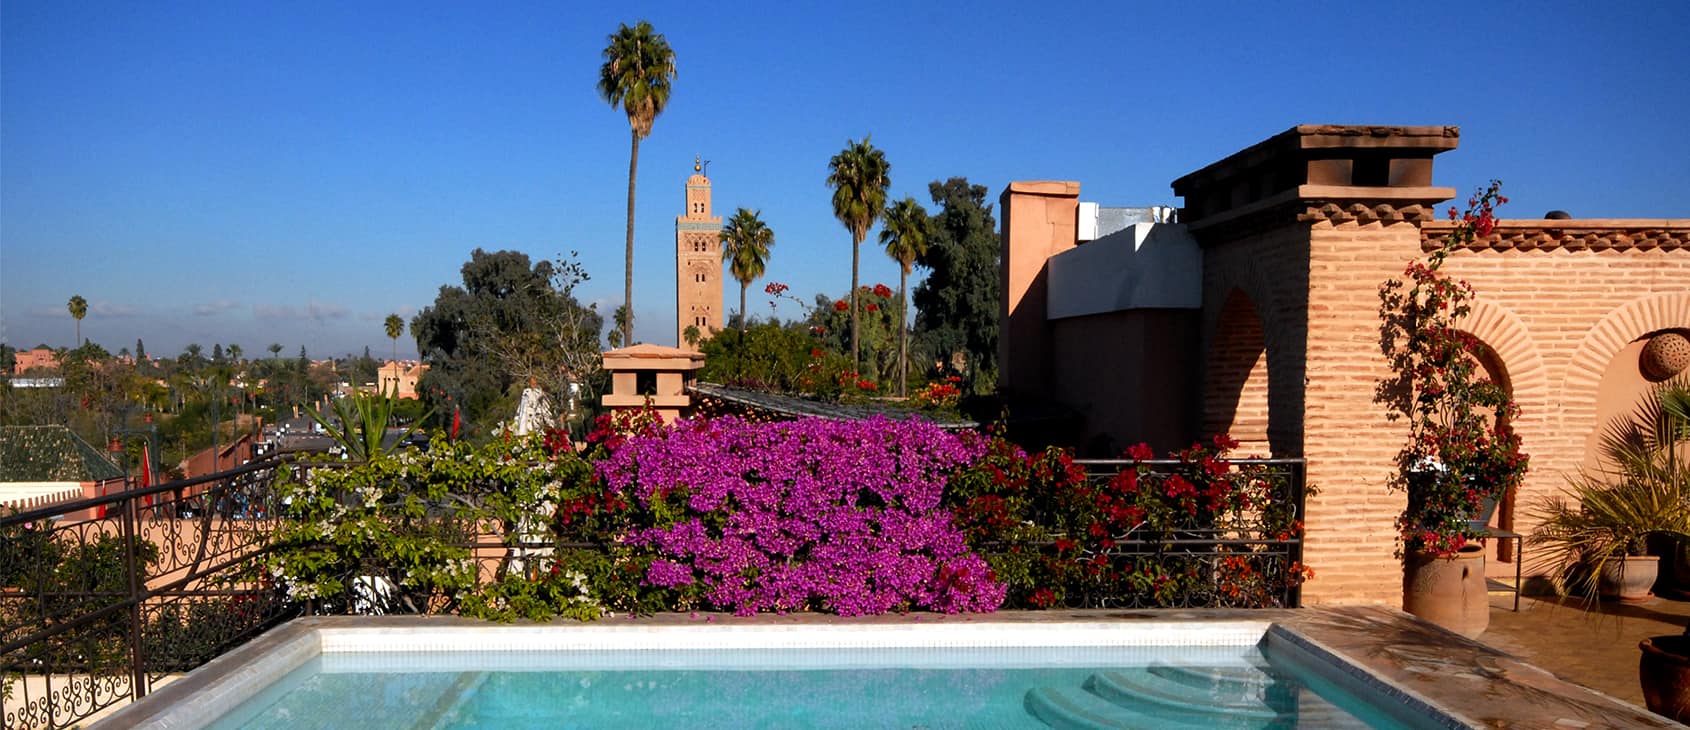 Riad accommodation in Marrakech